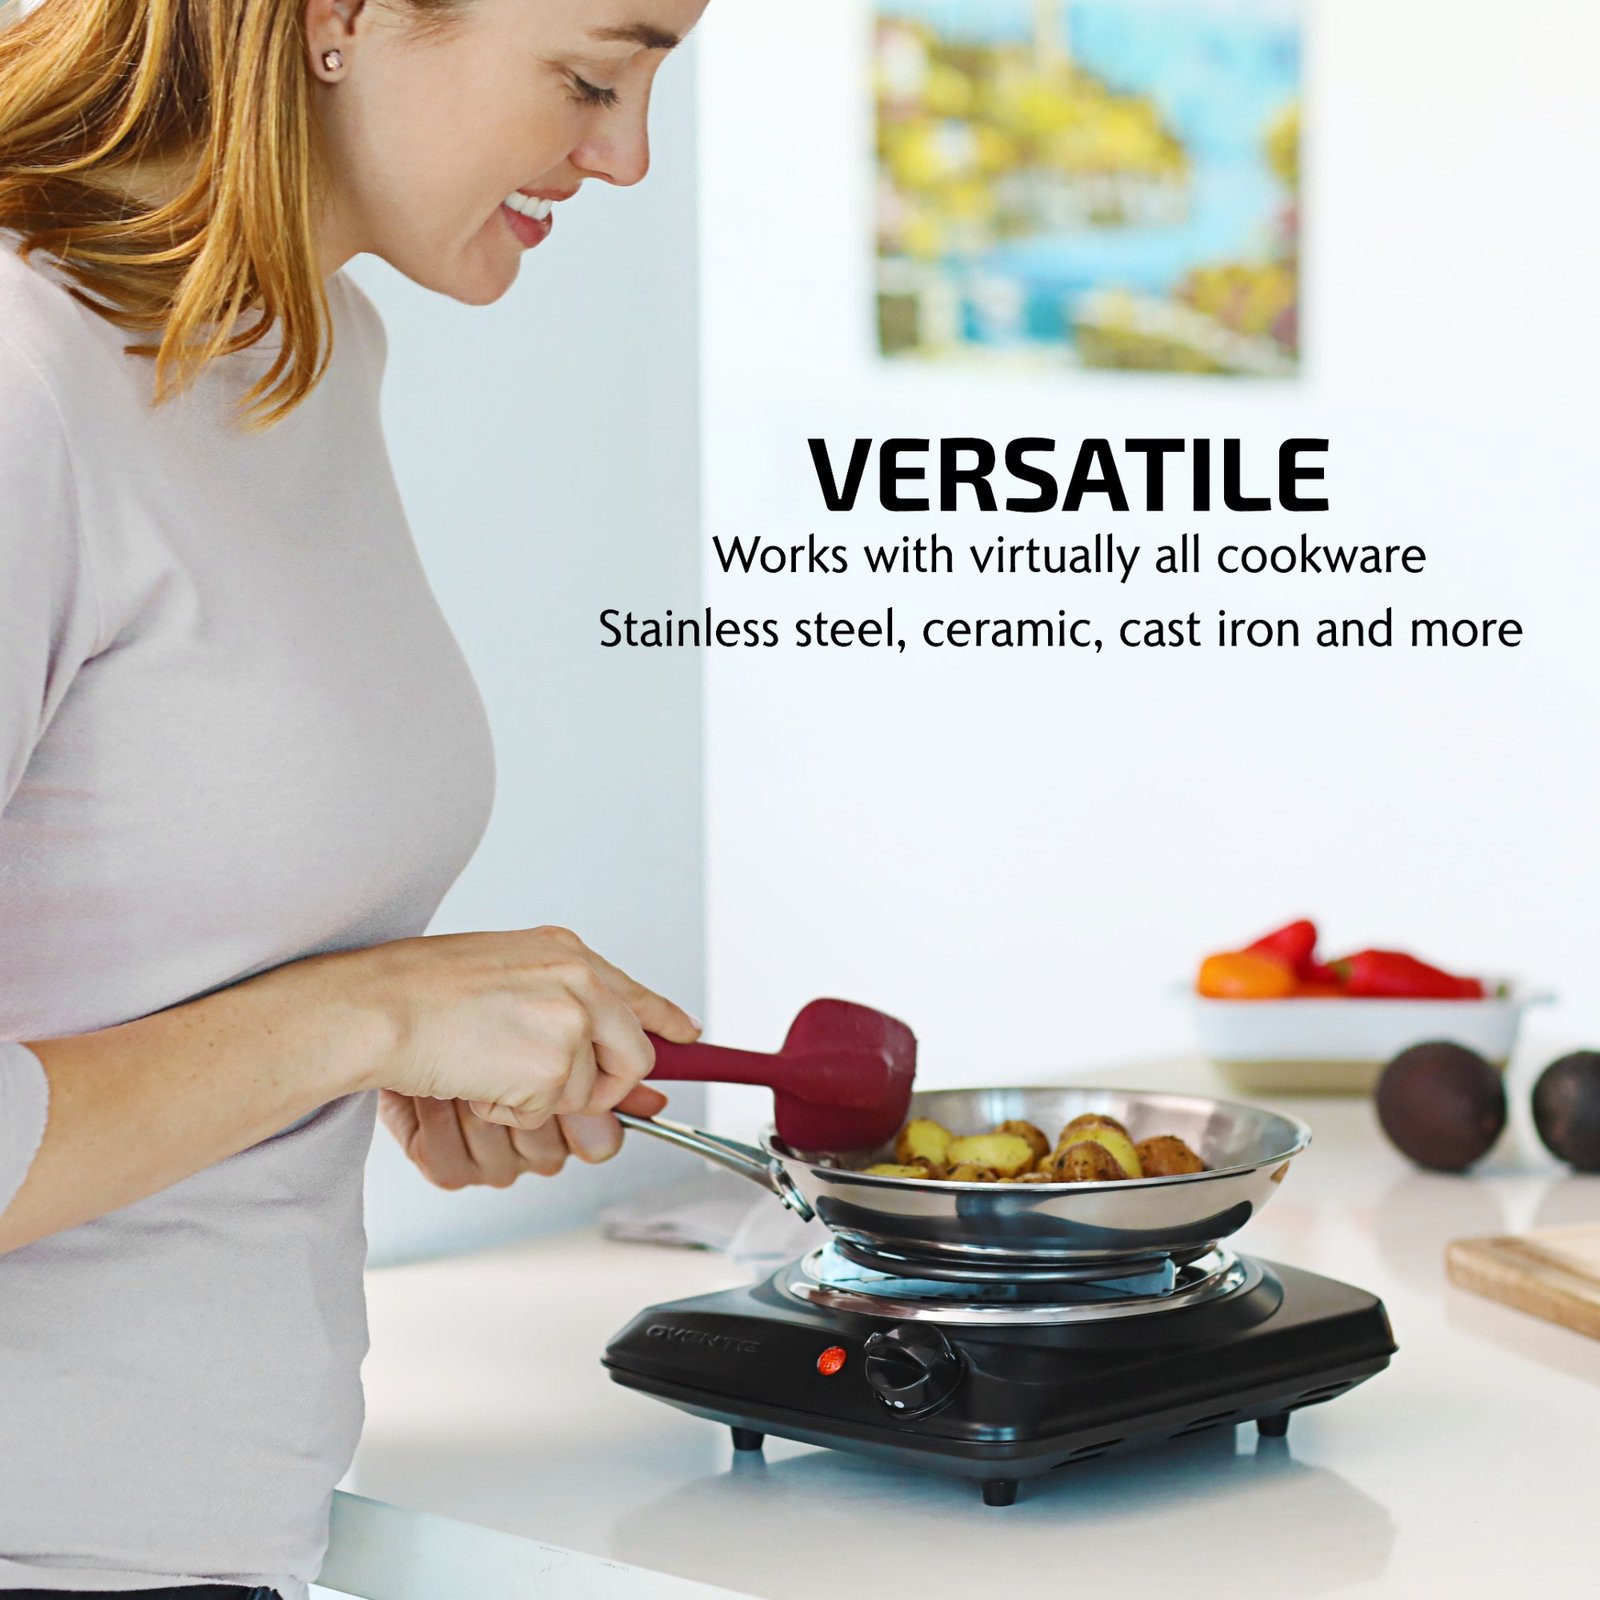 https://themarketdepot.com/wp-content/uploads/2023/01/Ovente-Electric-Single-Coil-Burner-6-Inch-Hot-Plate-Cooktop-with-5-Level-Temperature-Control-Easy-Clean-Stainless-Steel-Base-1000W-Portable-Countertop-Stove-for-Home-Office-Black-BGC101B-4.jpeg